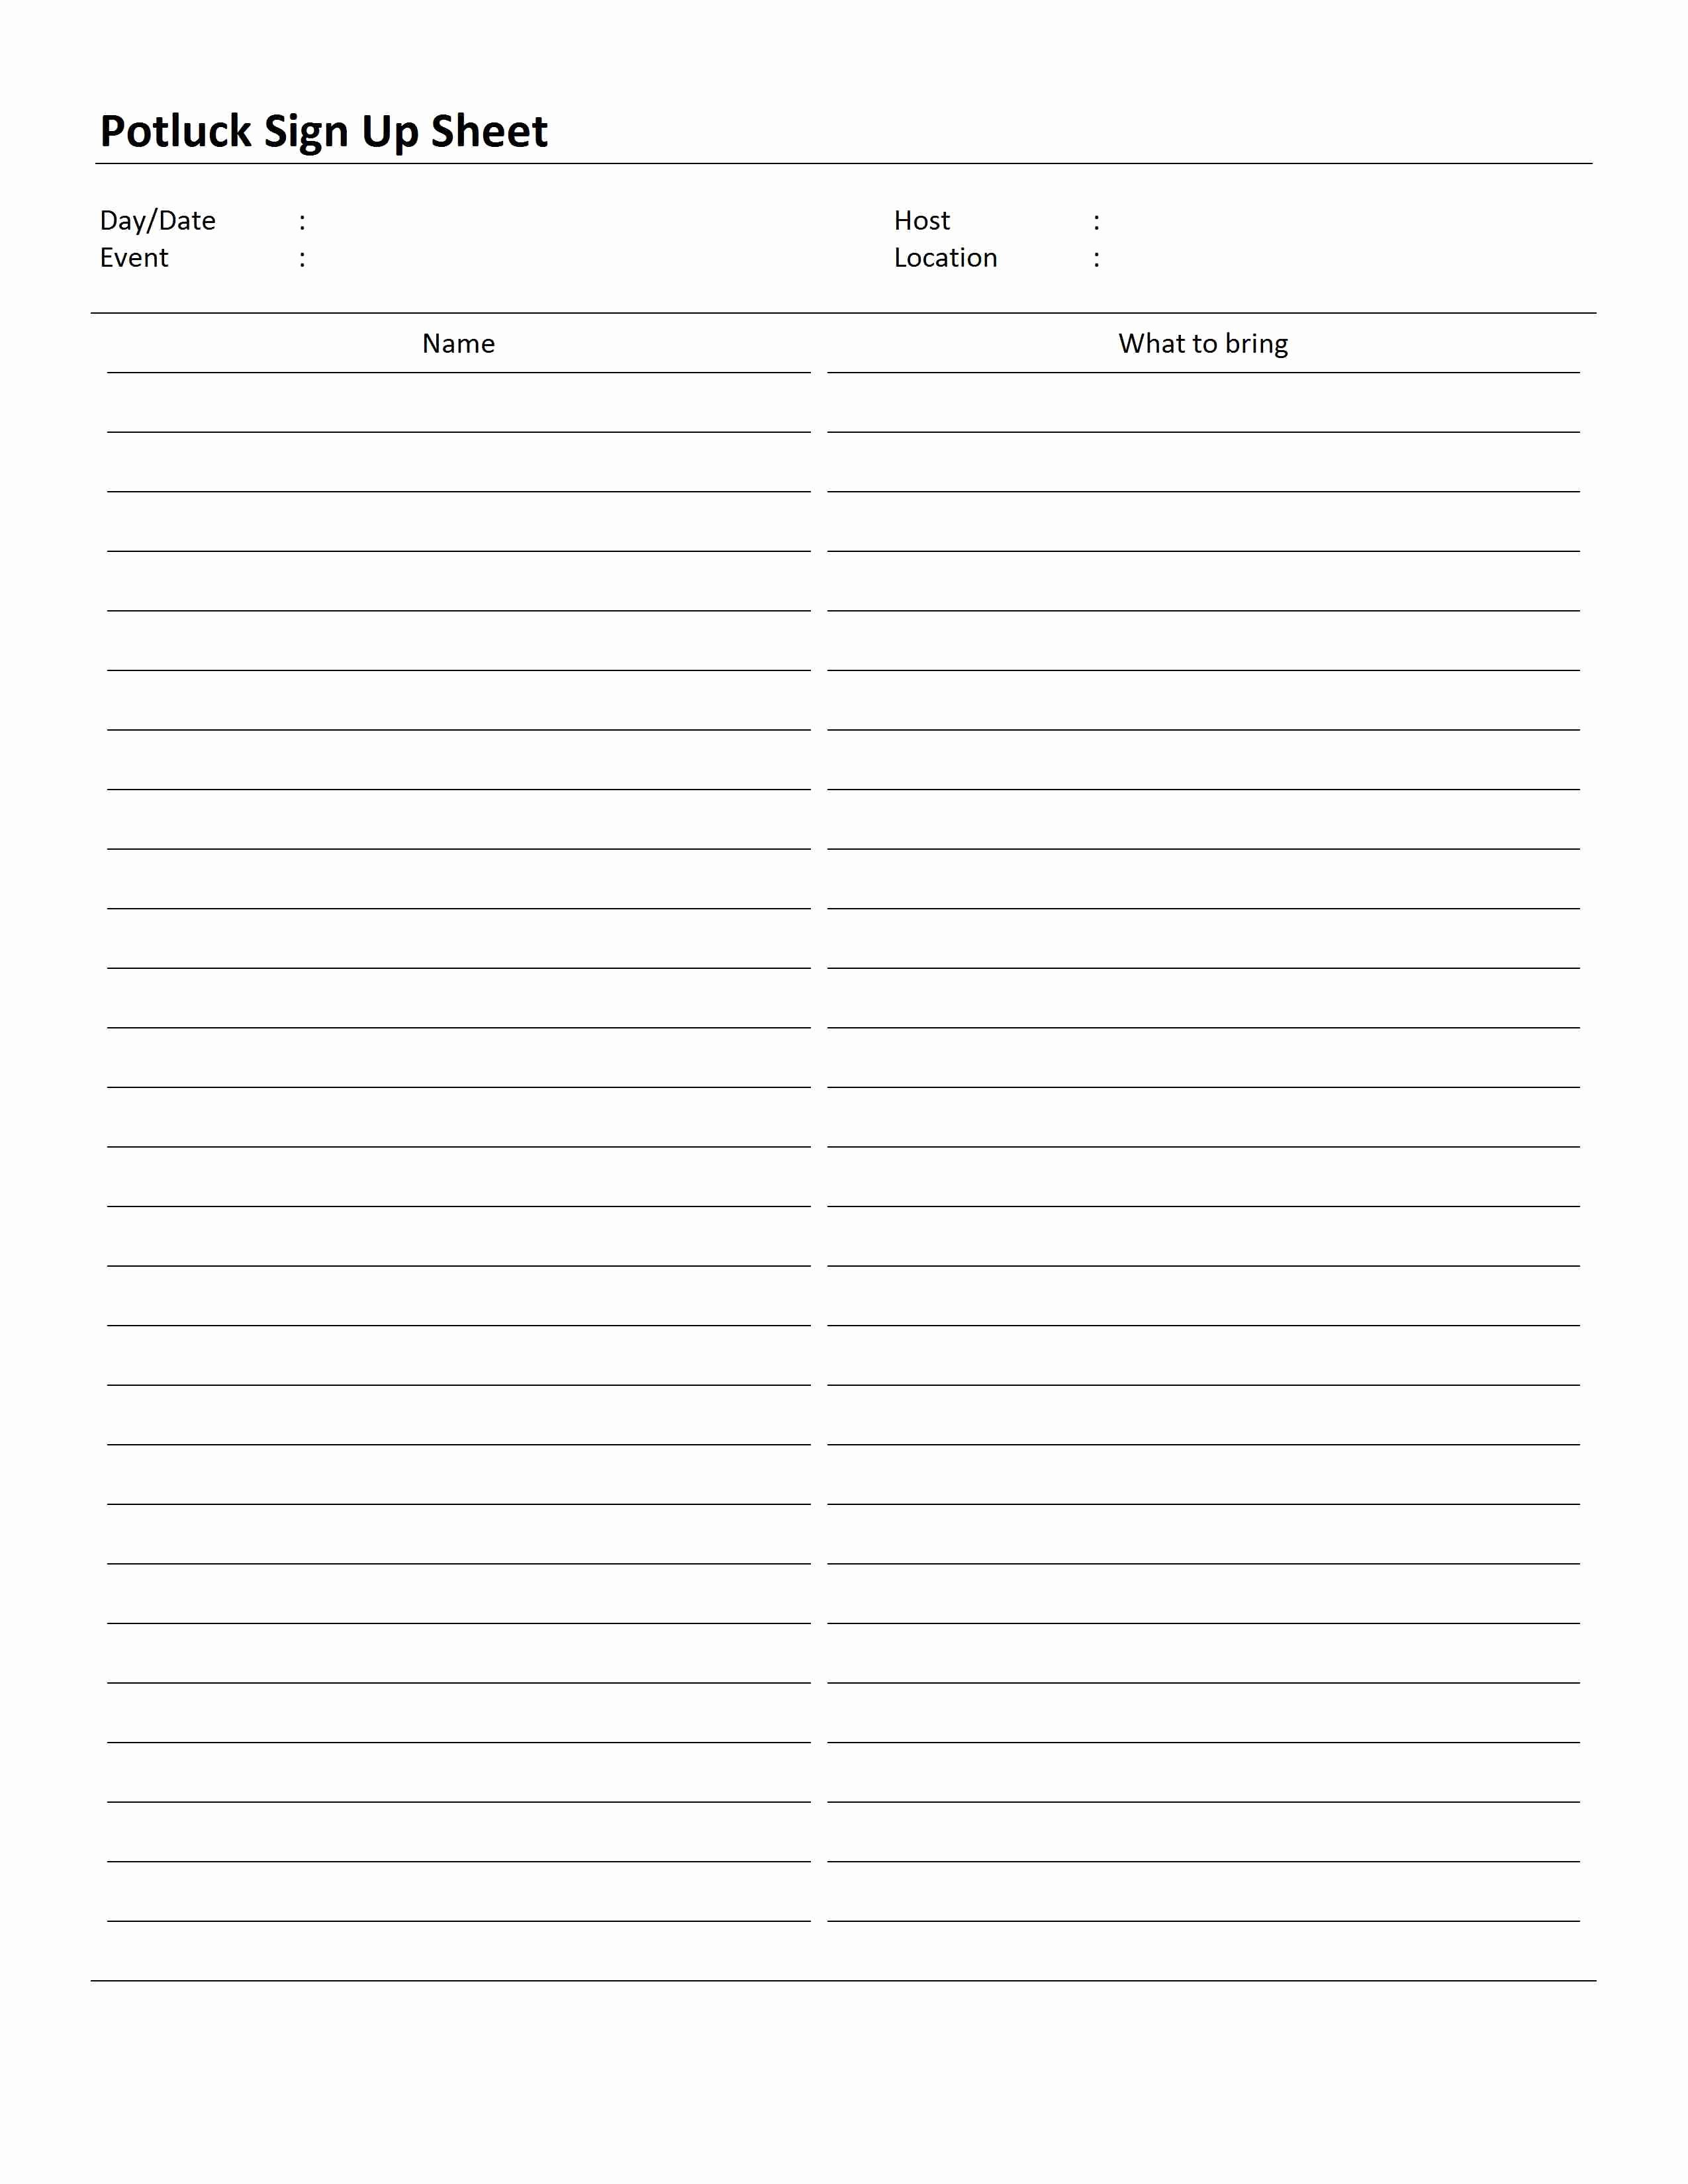 Sign Up Sheet Template Free Luxury Potluck Sign Up Sheet